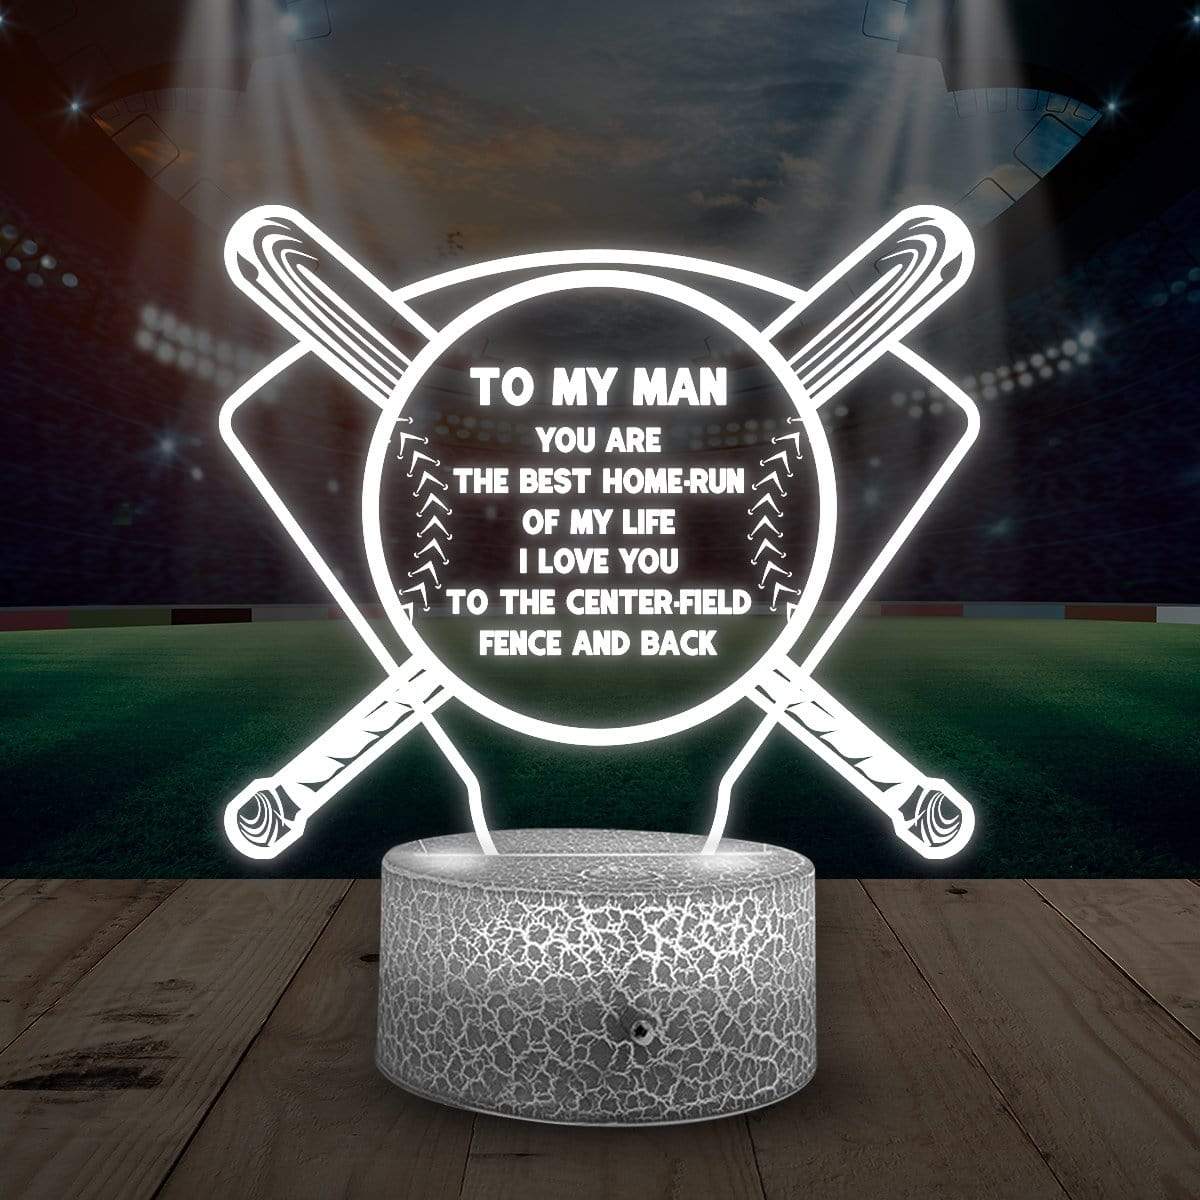 3D Led Light - Baseball - To My Man - You Are The Best Home-Run Of My Life - Glca26012